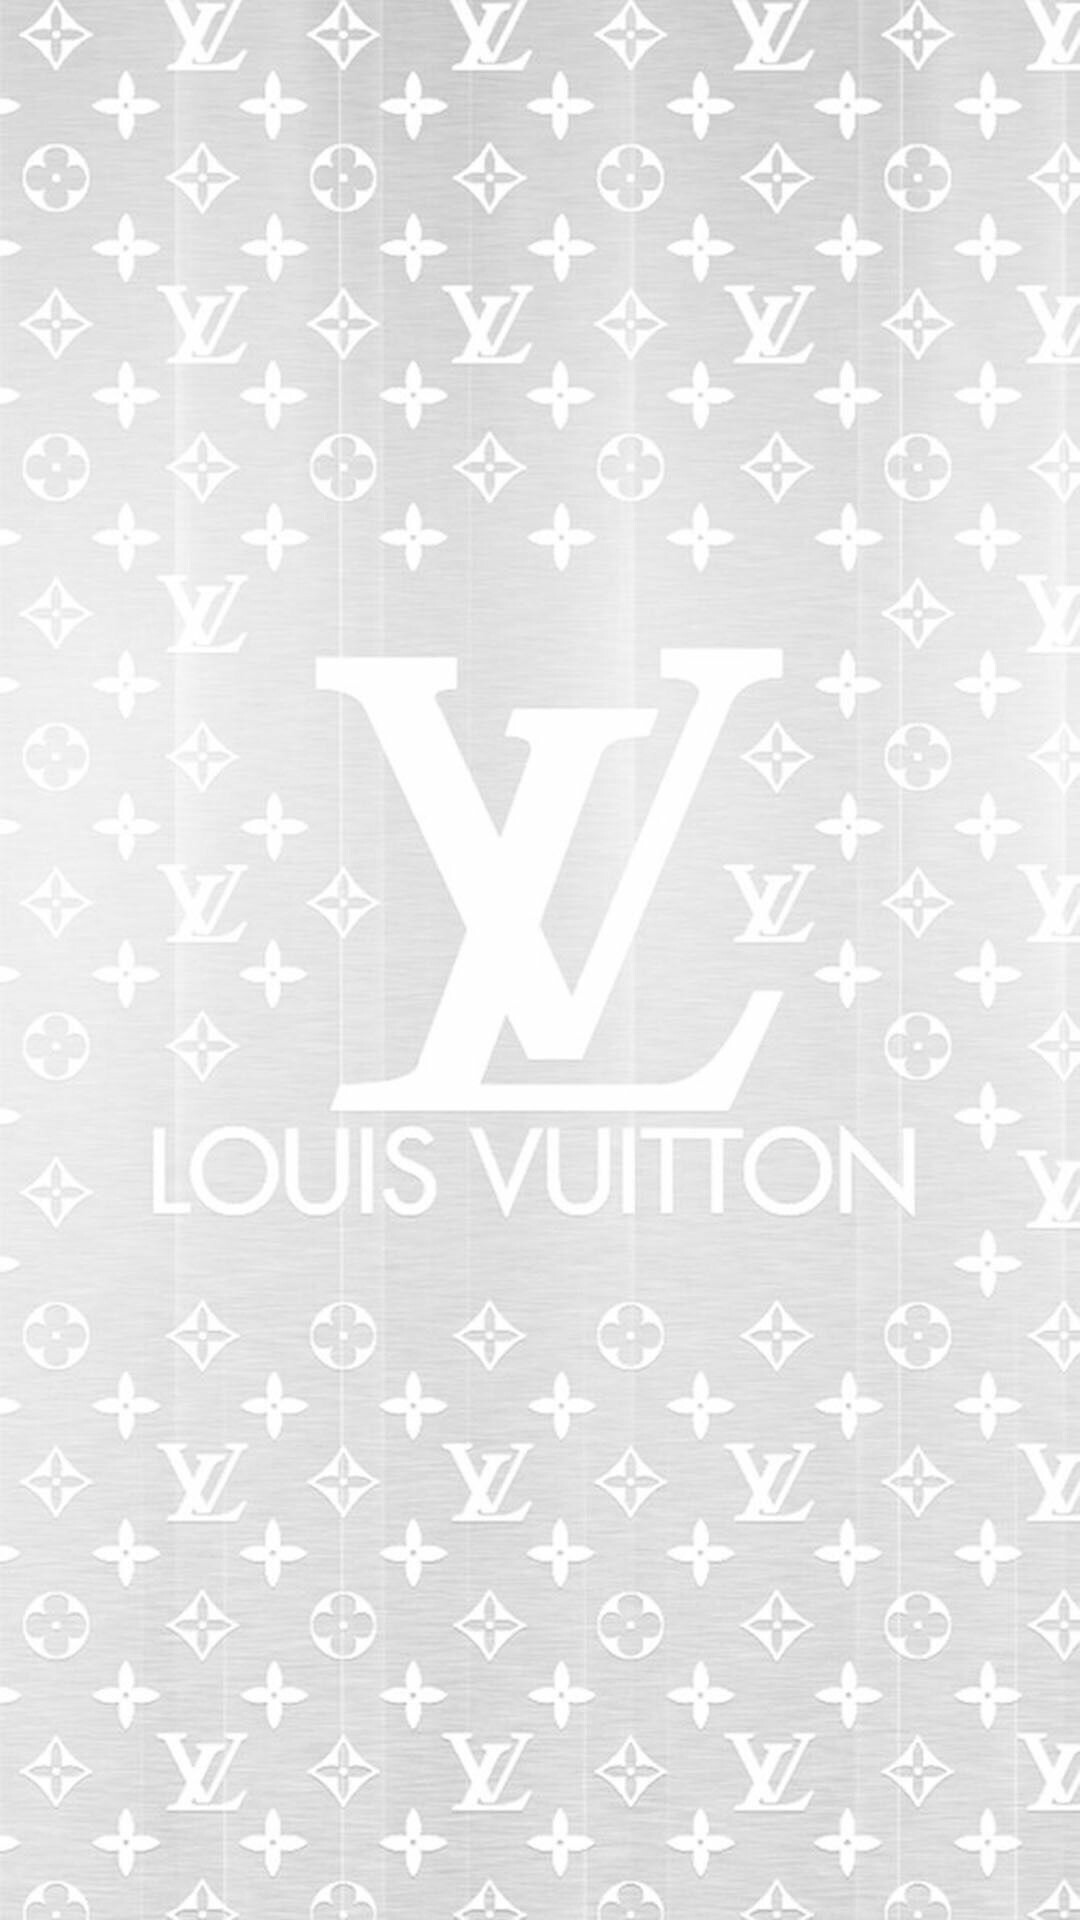 Louis Vuitton: The company hired Darren Spaziani to lead its accessory collection in September 2013. 1080x1920 Full HD Background.